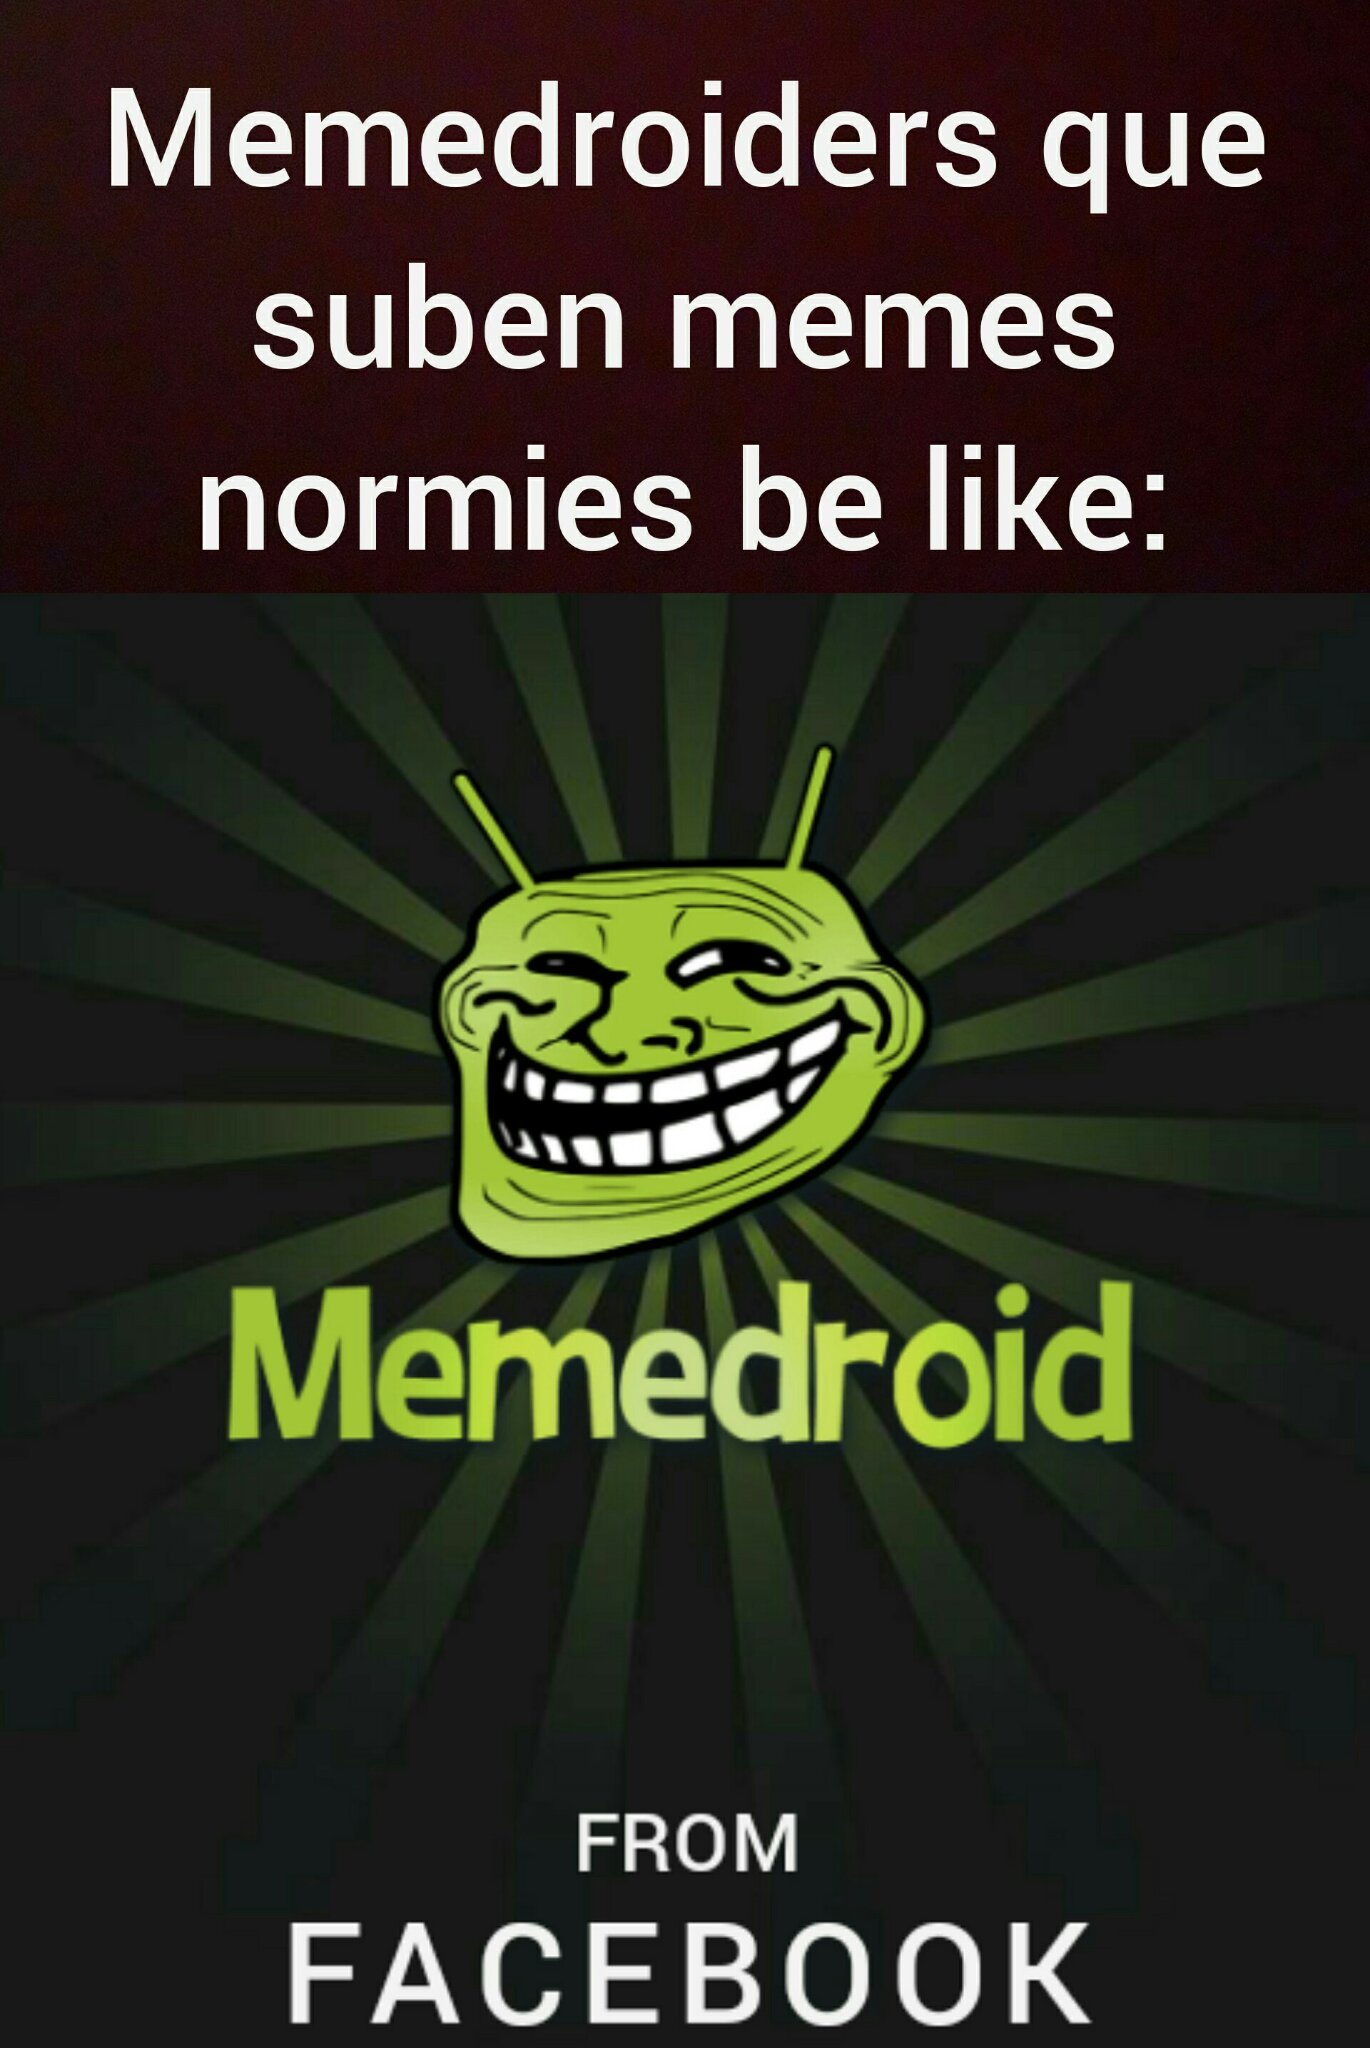 Memedroid from facebook